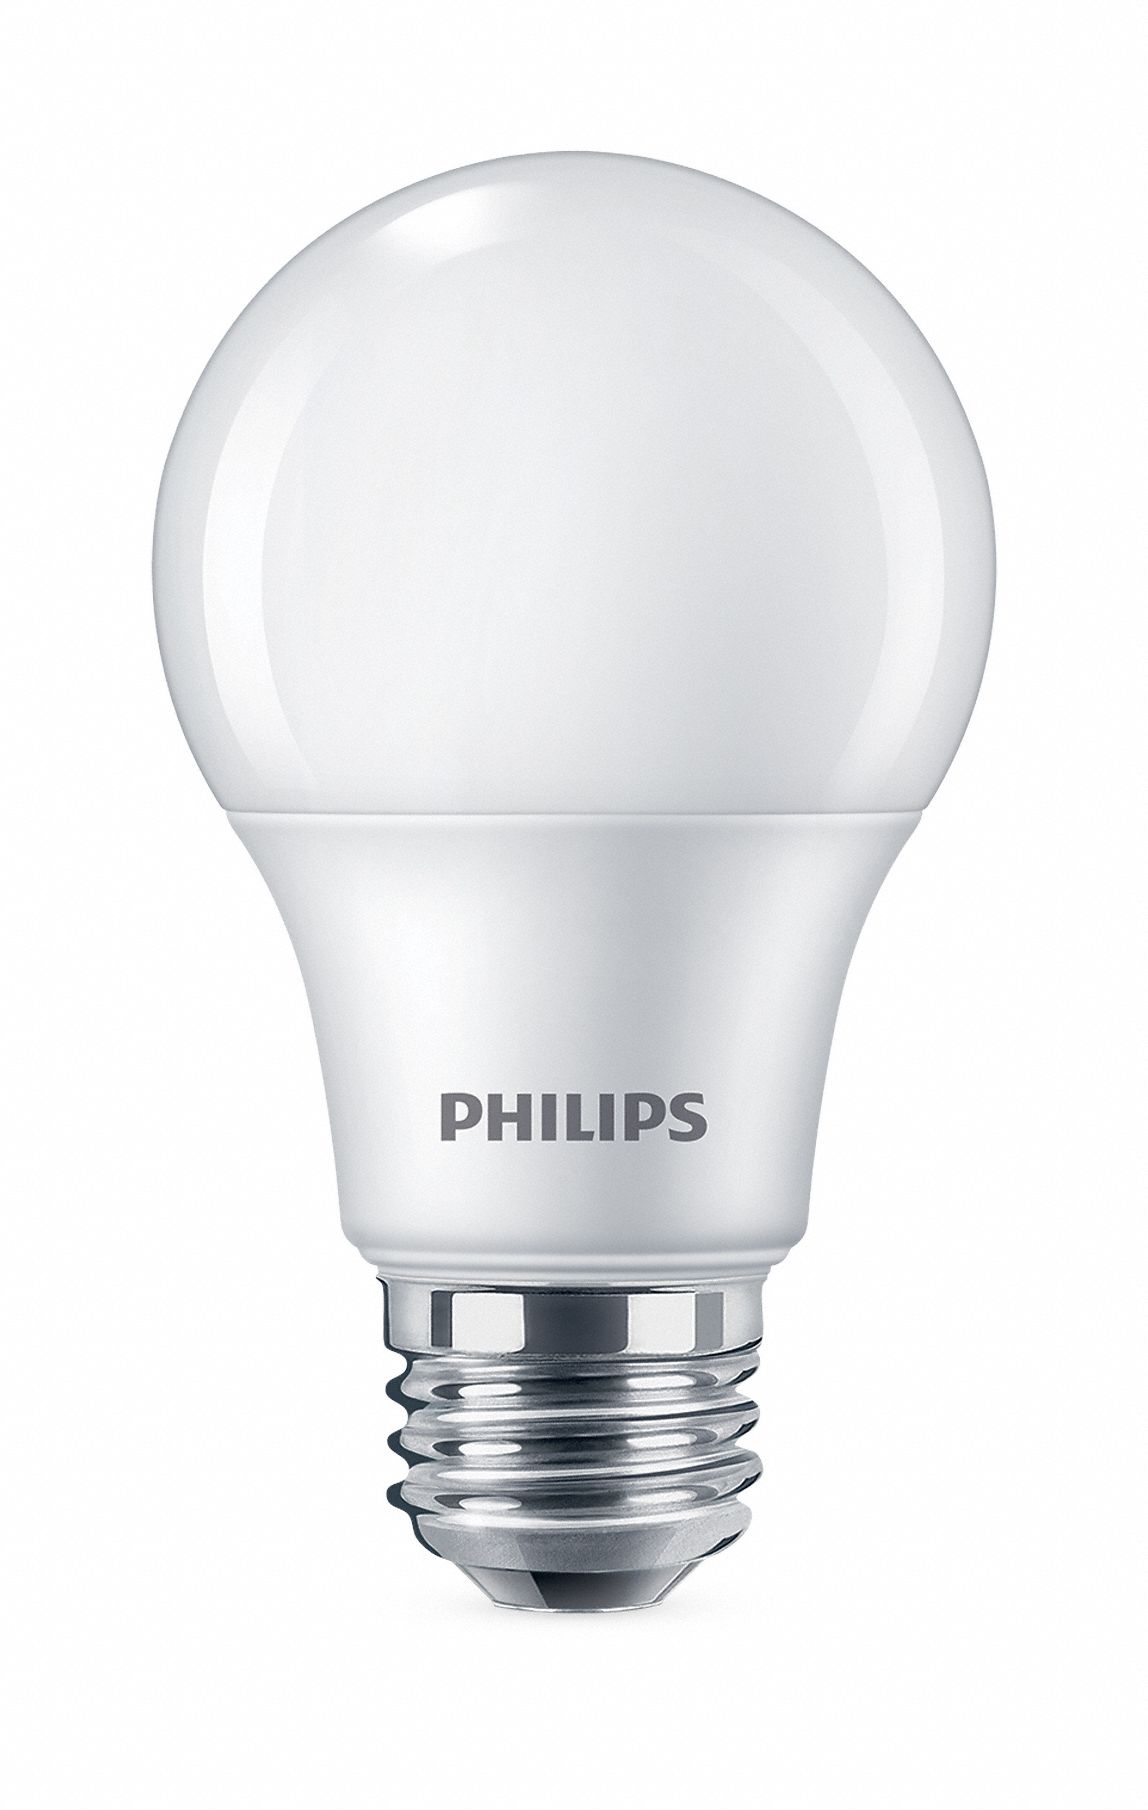 Medicinaal Email schrijven T PHILIPS, A19, Medium Screw (E26), LED Lamp Replacement - 784ND5|8.5A19/LED/930/FR/P/ND  4/1FB - Grainger